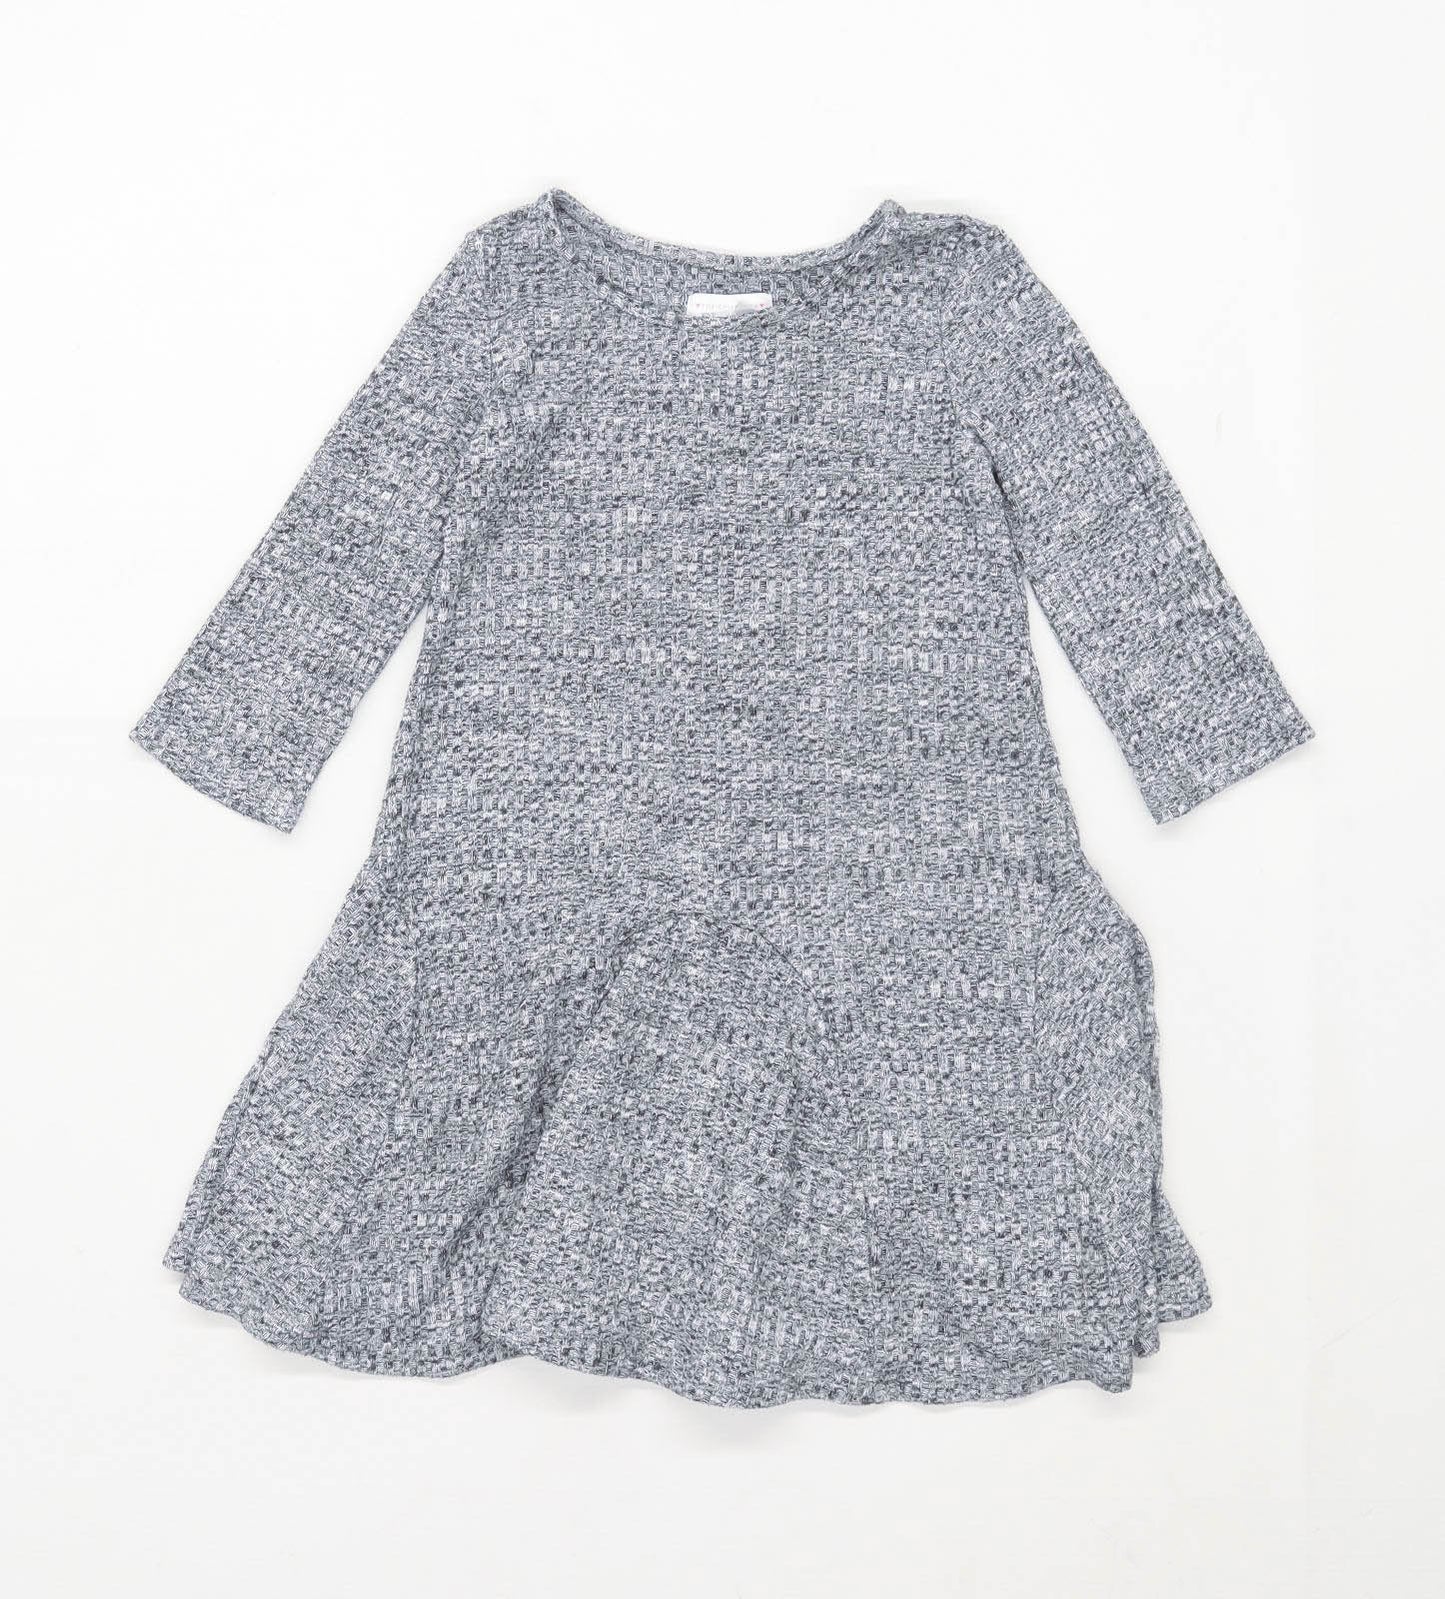 The Childrens Place Girls Grey Dress Age 5 Years